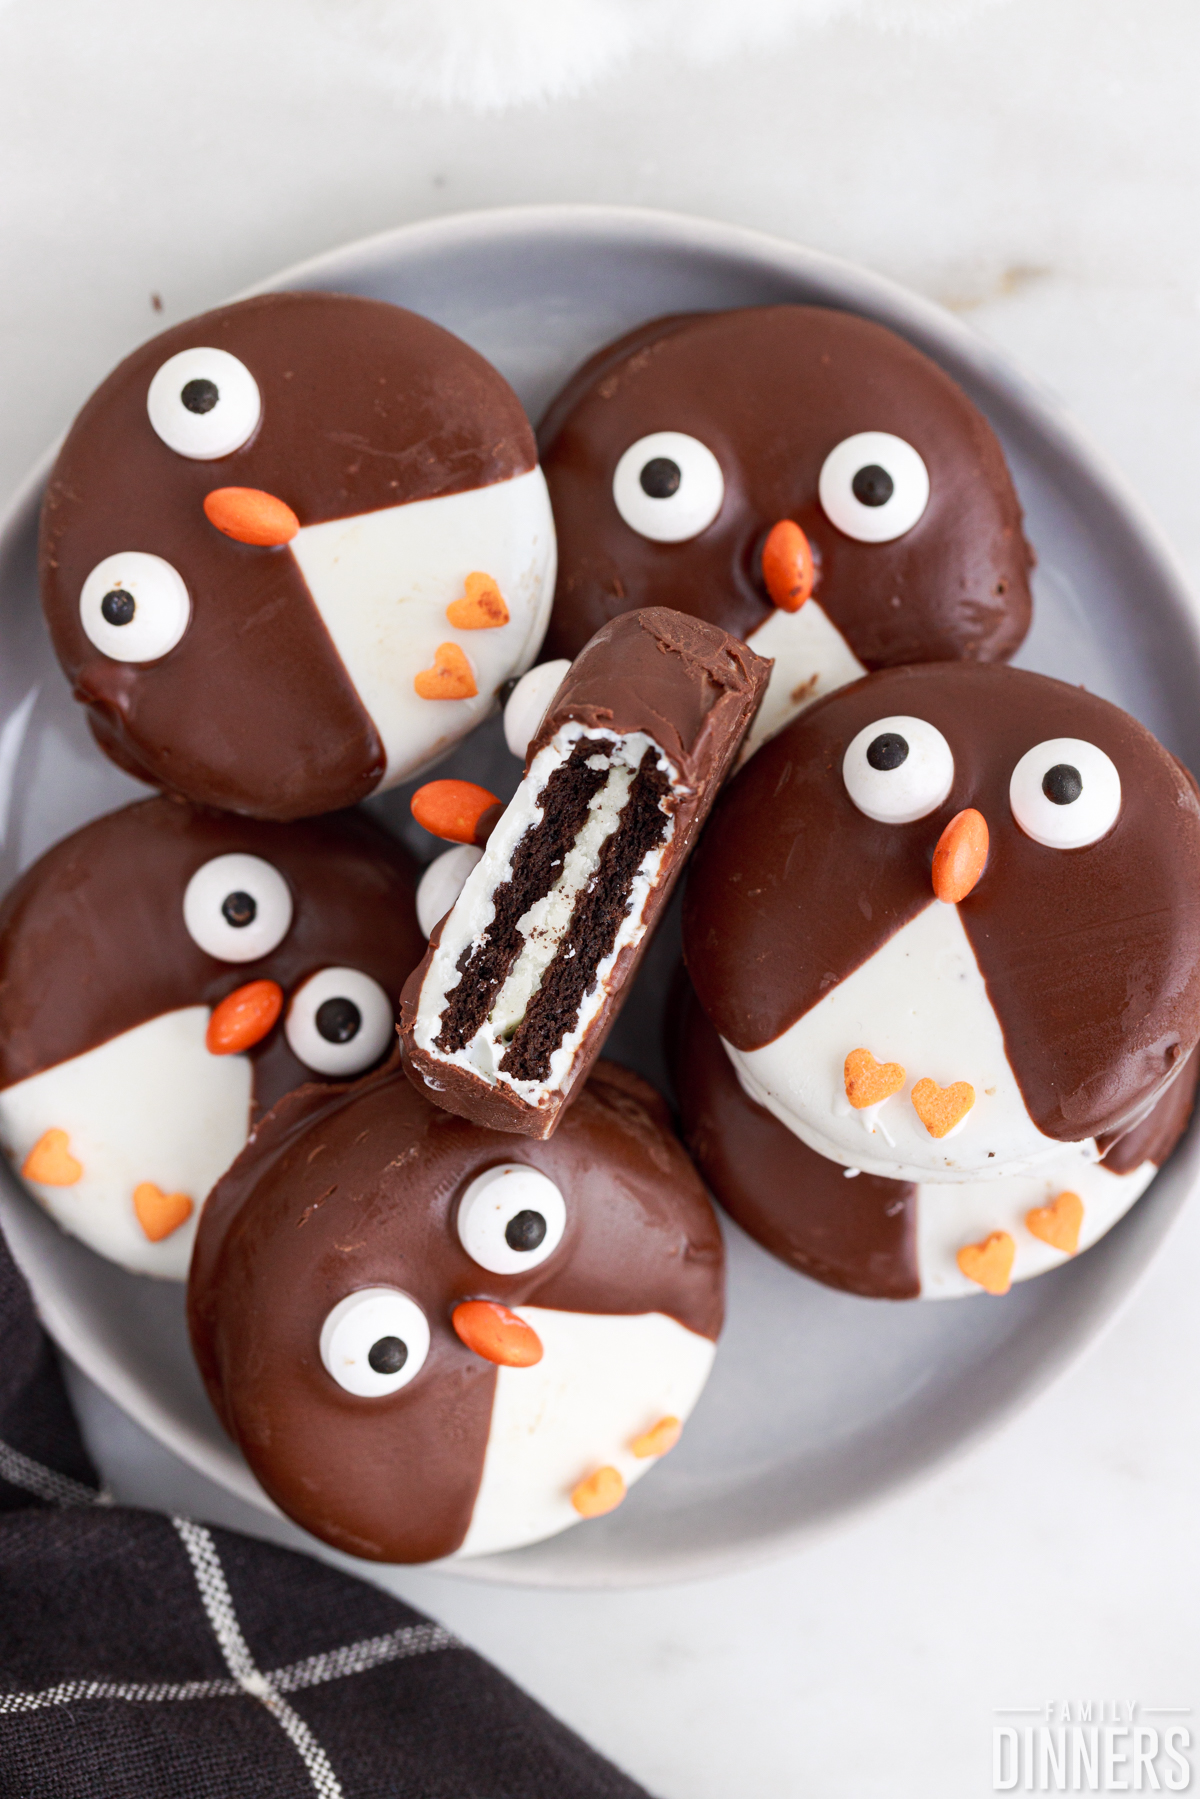 plate of penguin cookies. Top cookie facing up has bit out of it.